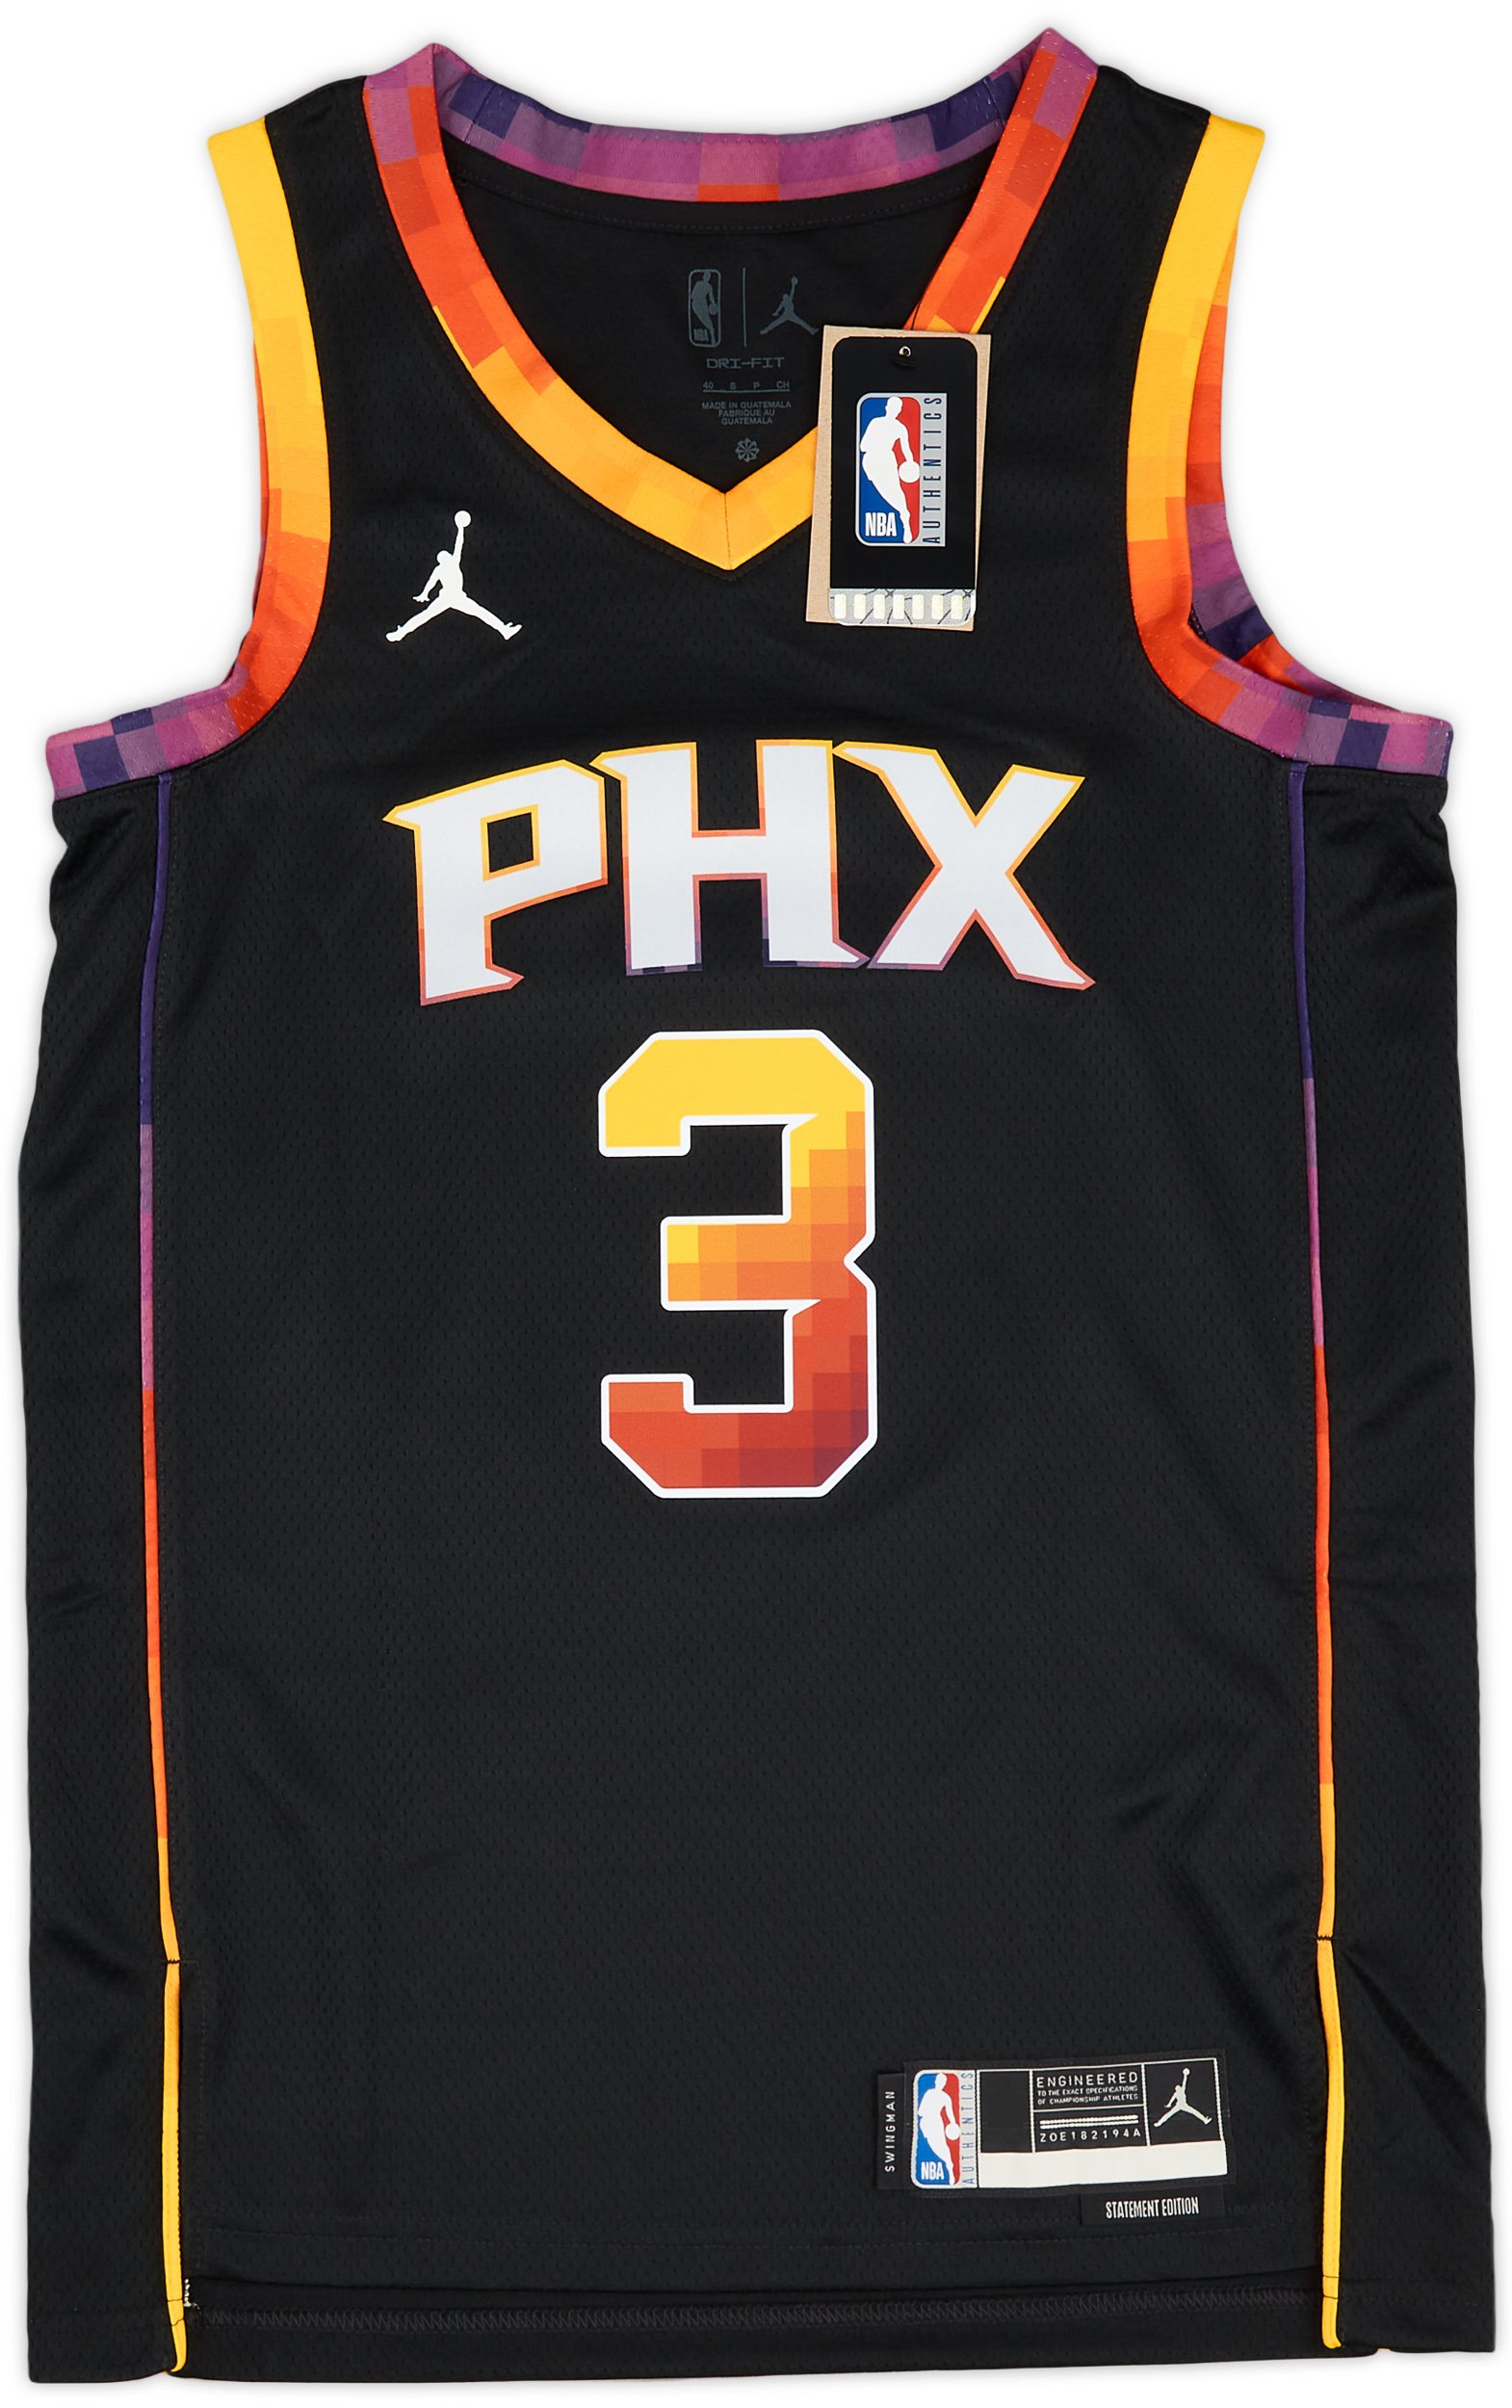 suns number 3